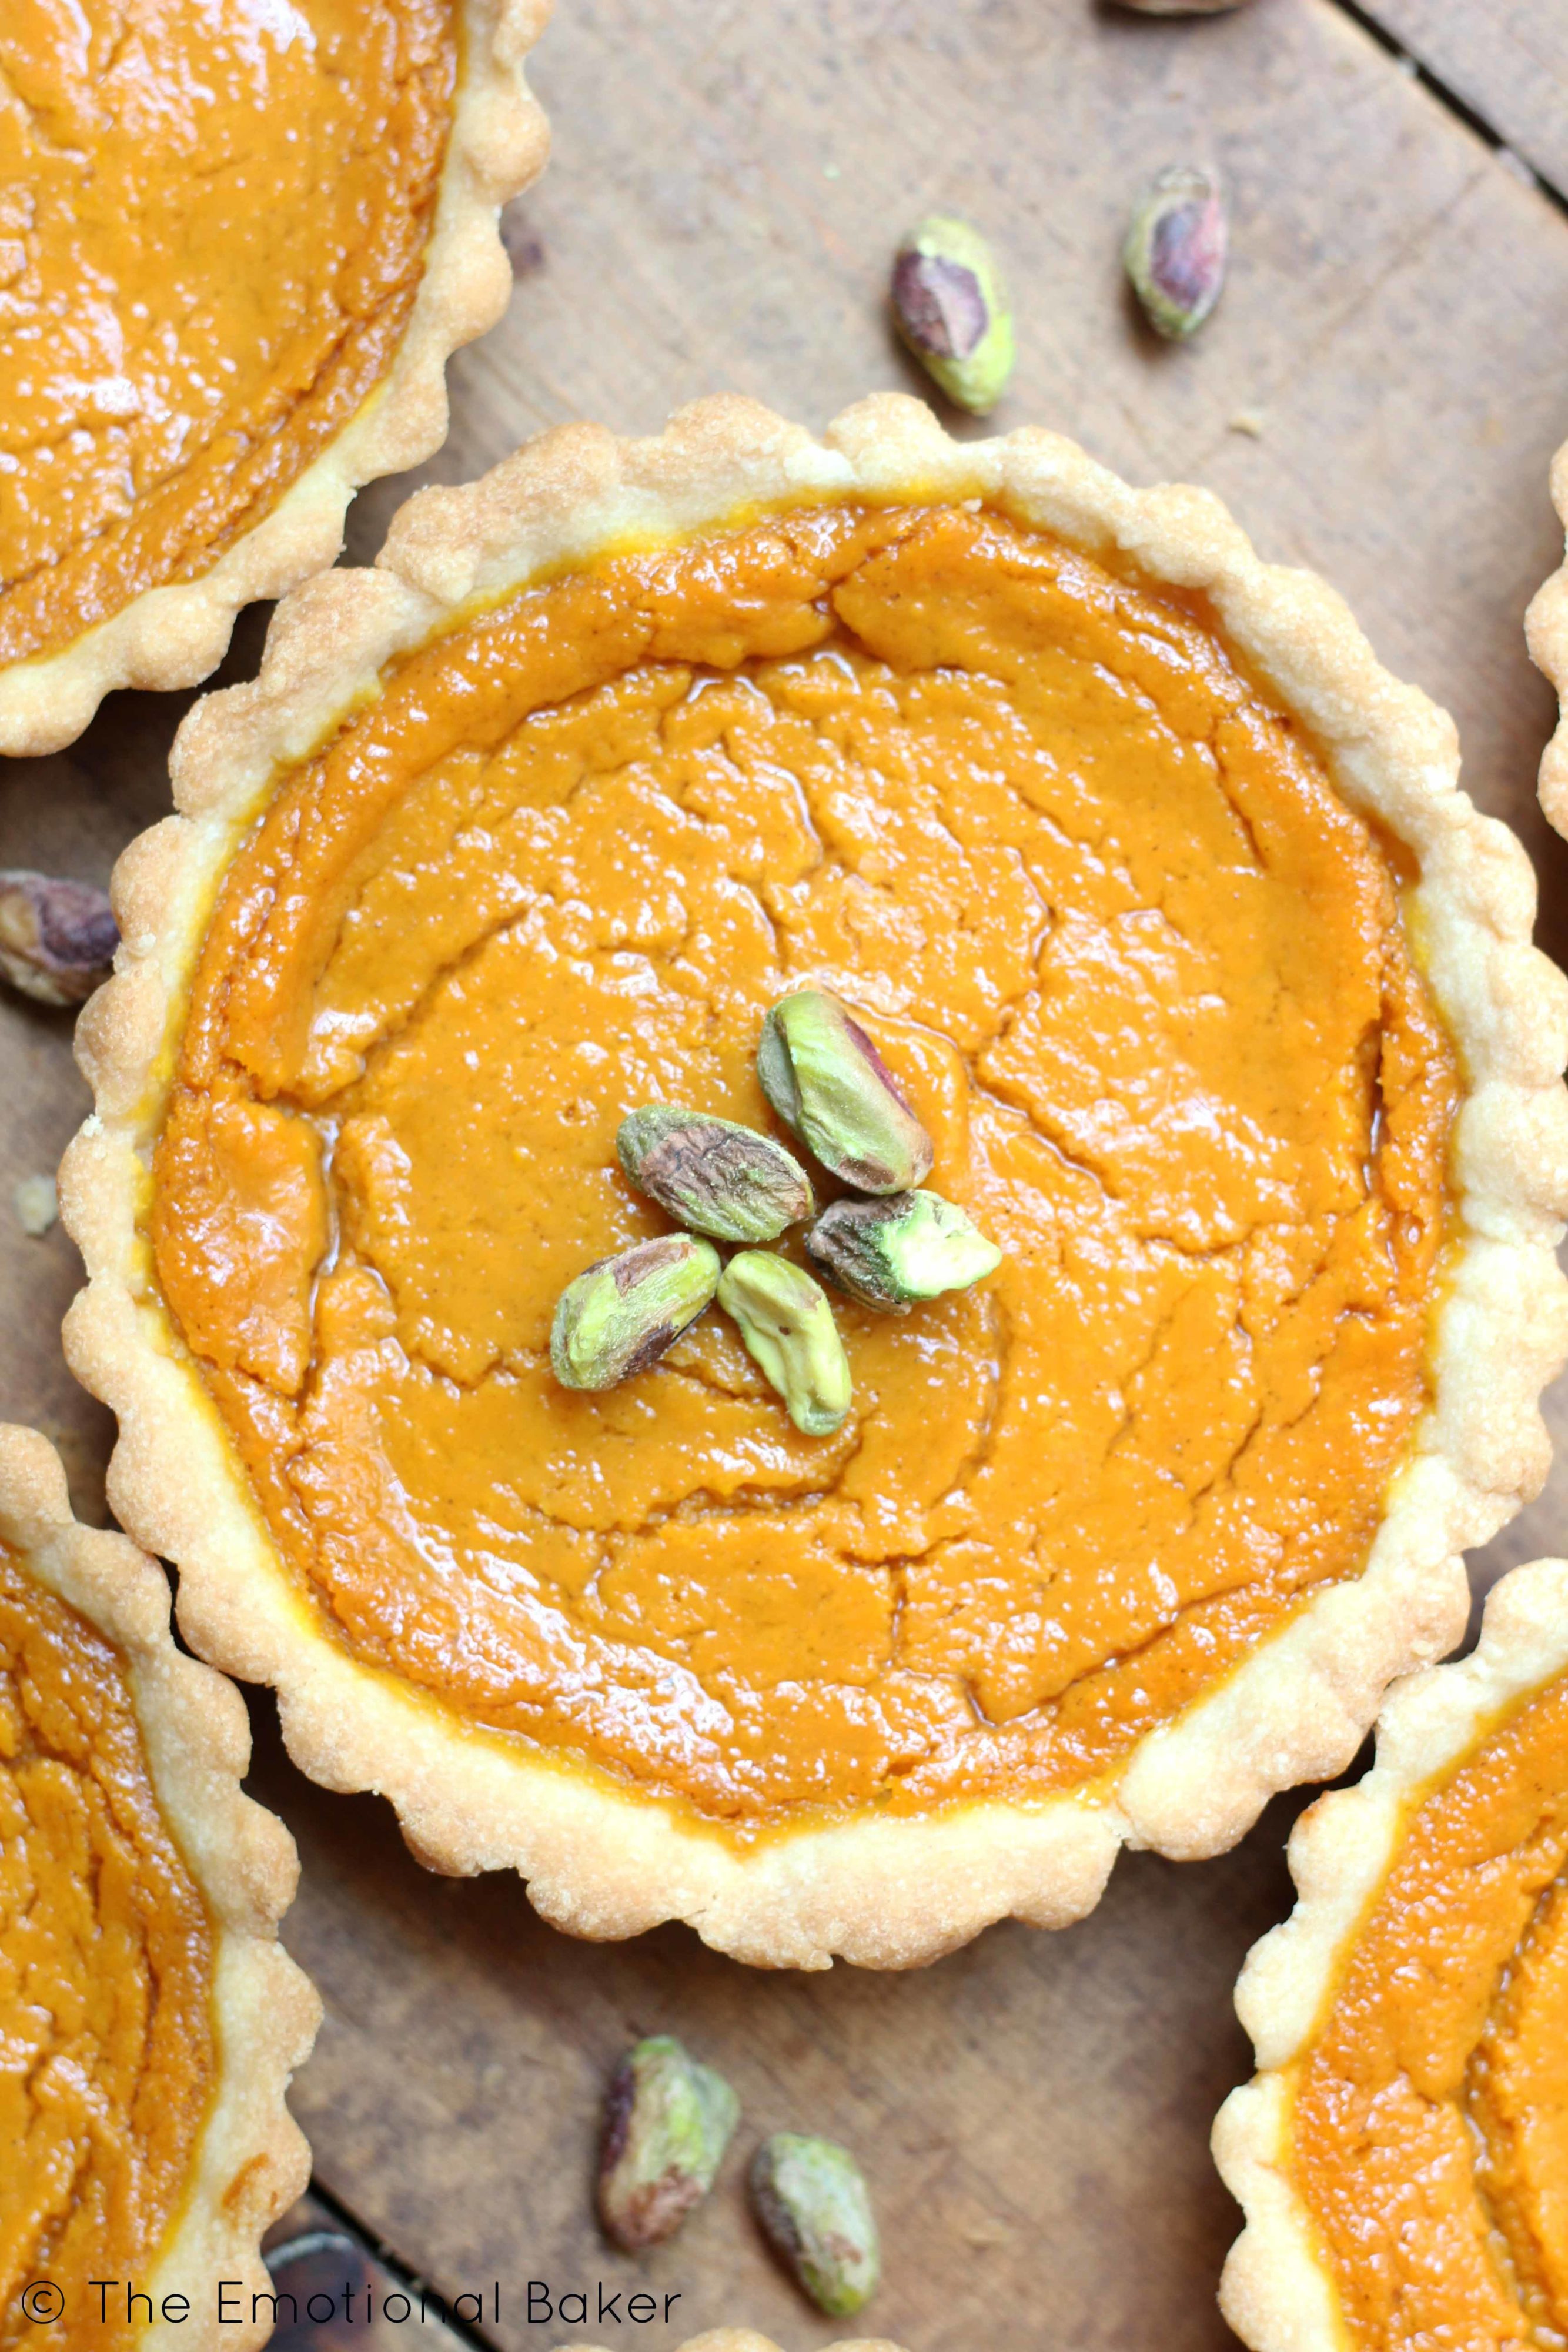 Add a new dessert to your Easter celebration - Carrot Tarts. These sweet mini pies are bursting with carrot flavor and accented with cardamom and nutmeg.